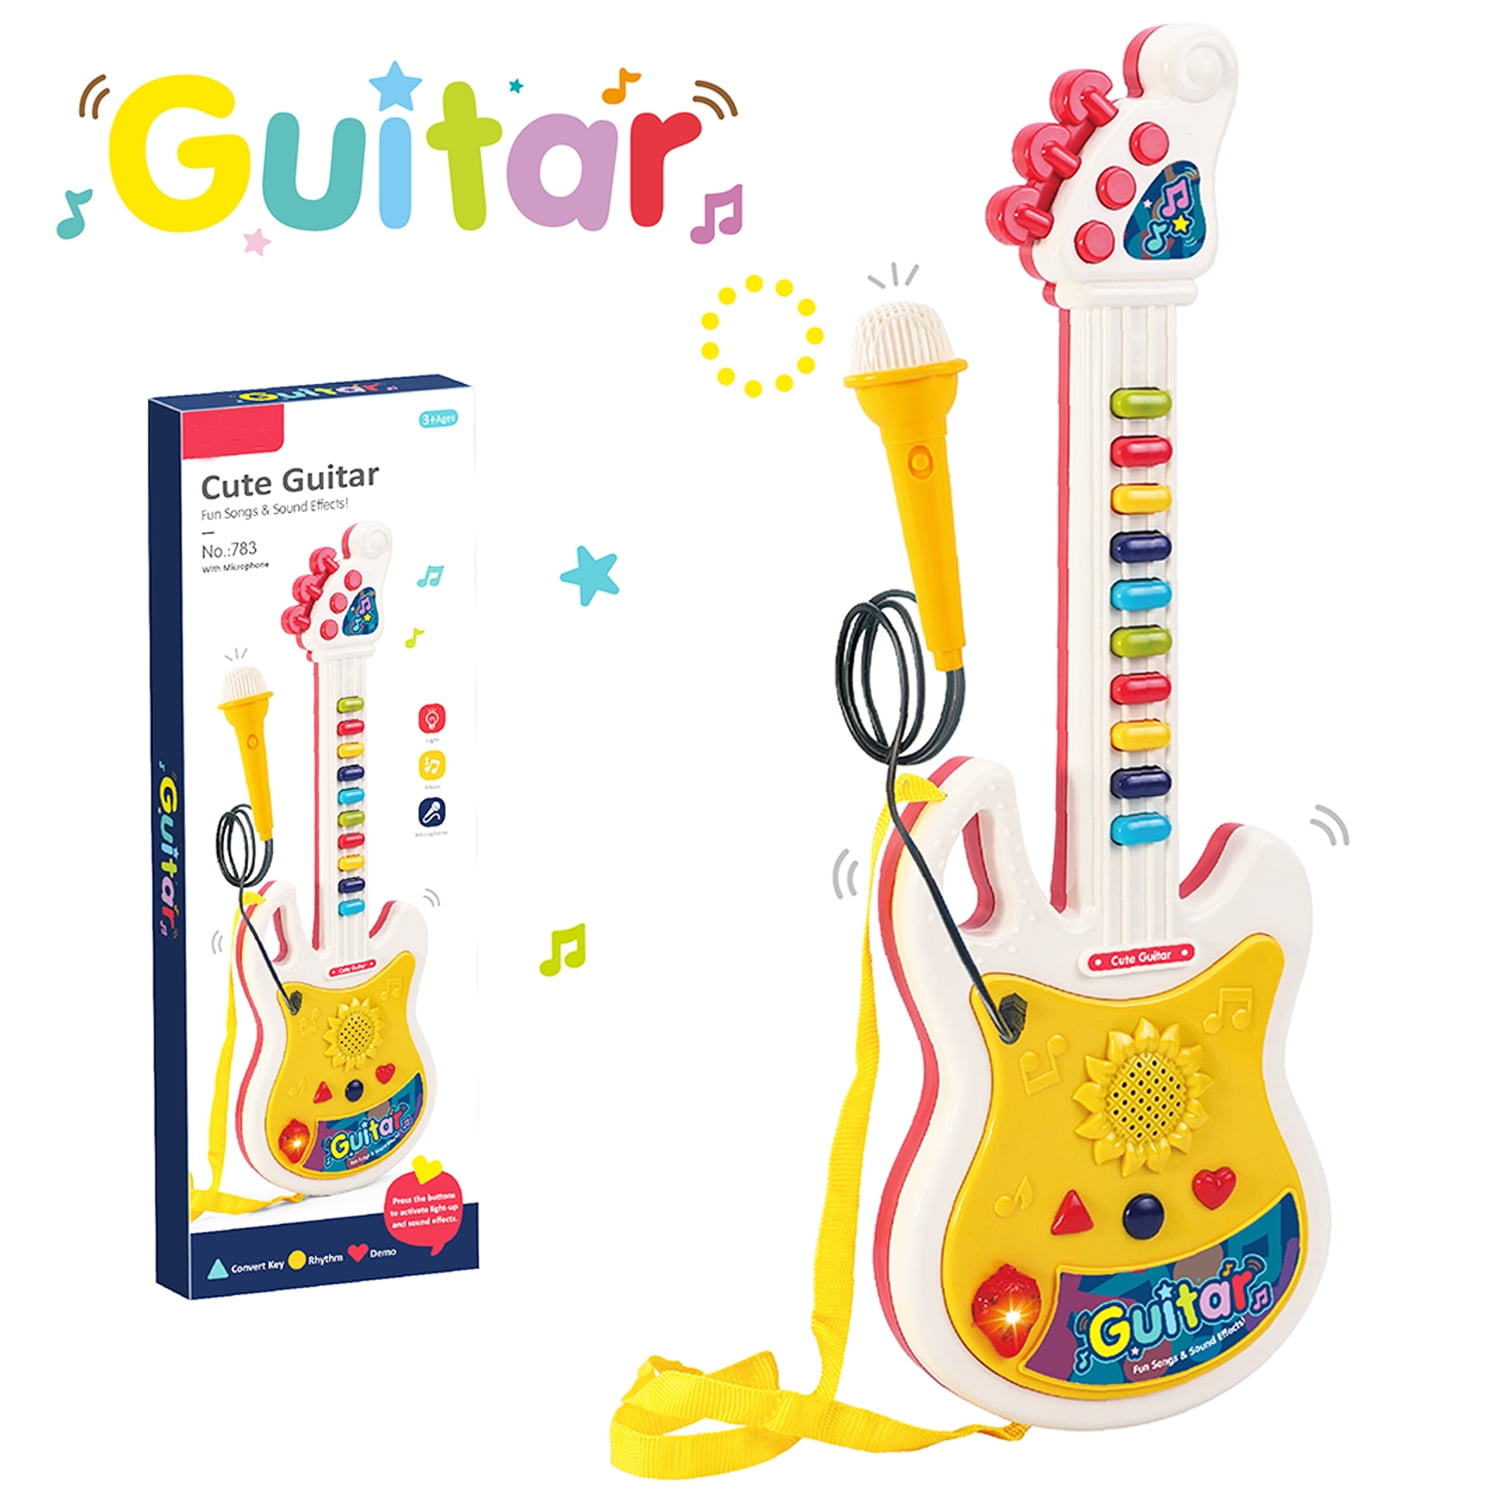 Sytle-Carry Kids Guitar Toy, Guitar and Microphone Set for Kids, Guitar ...